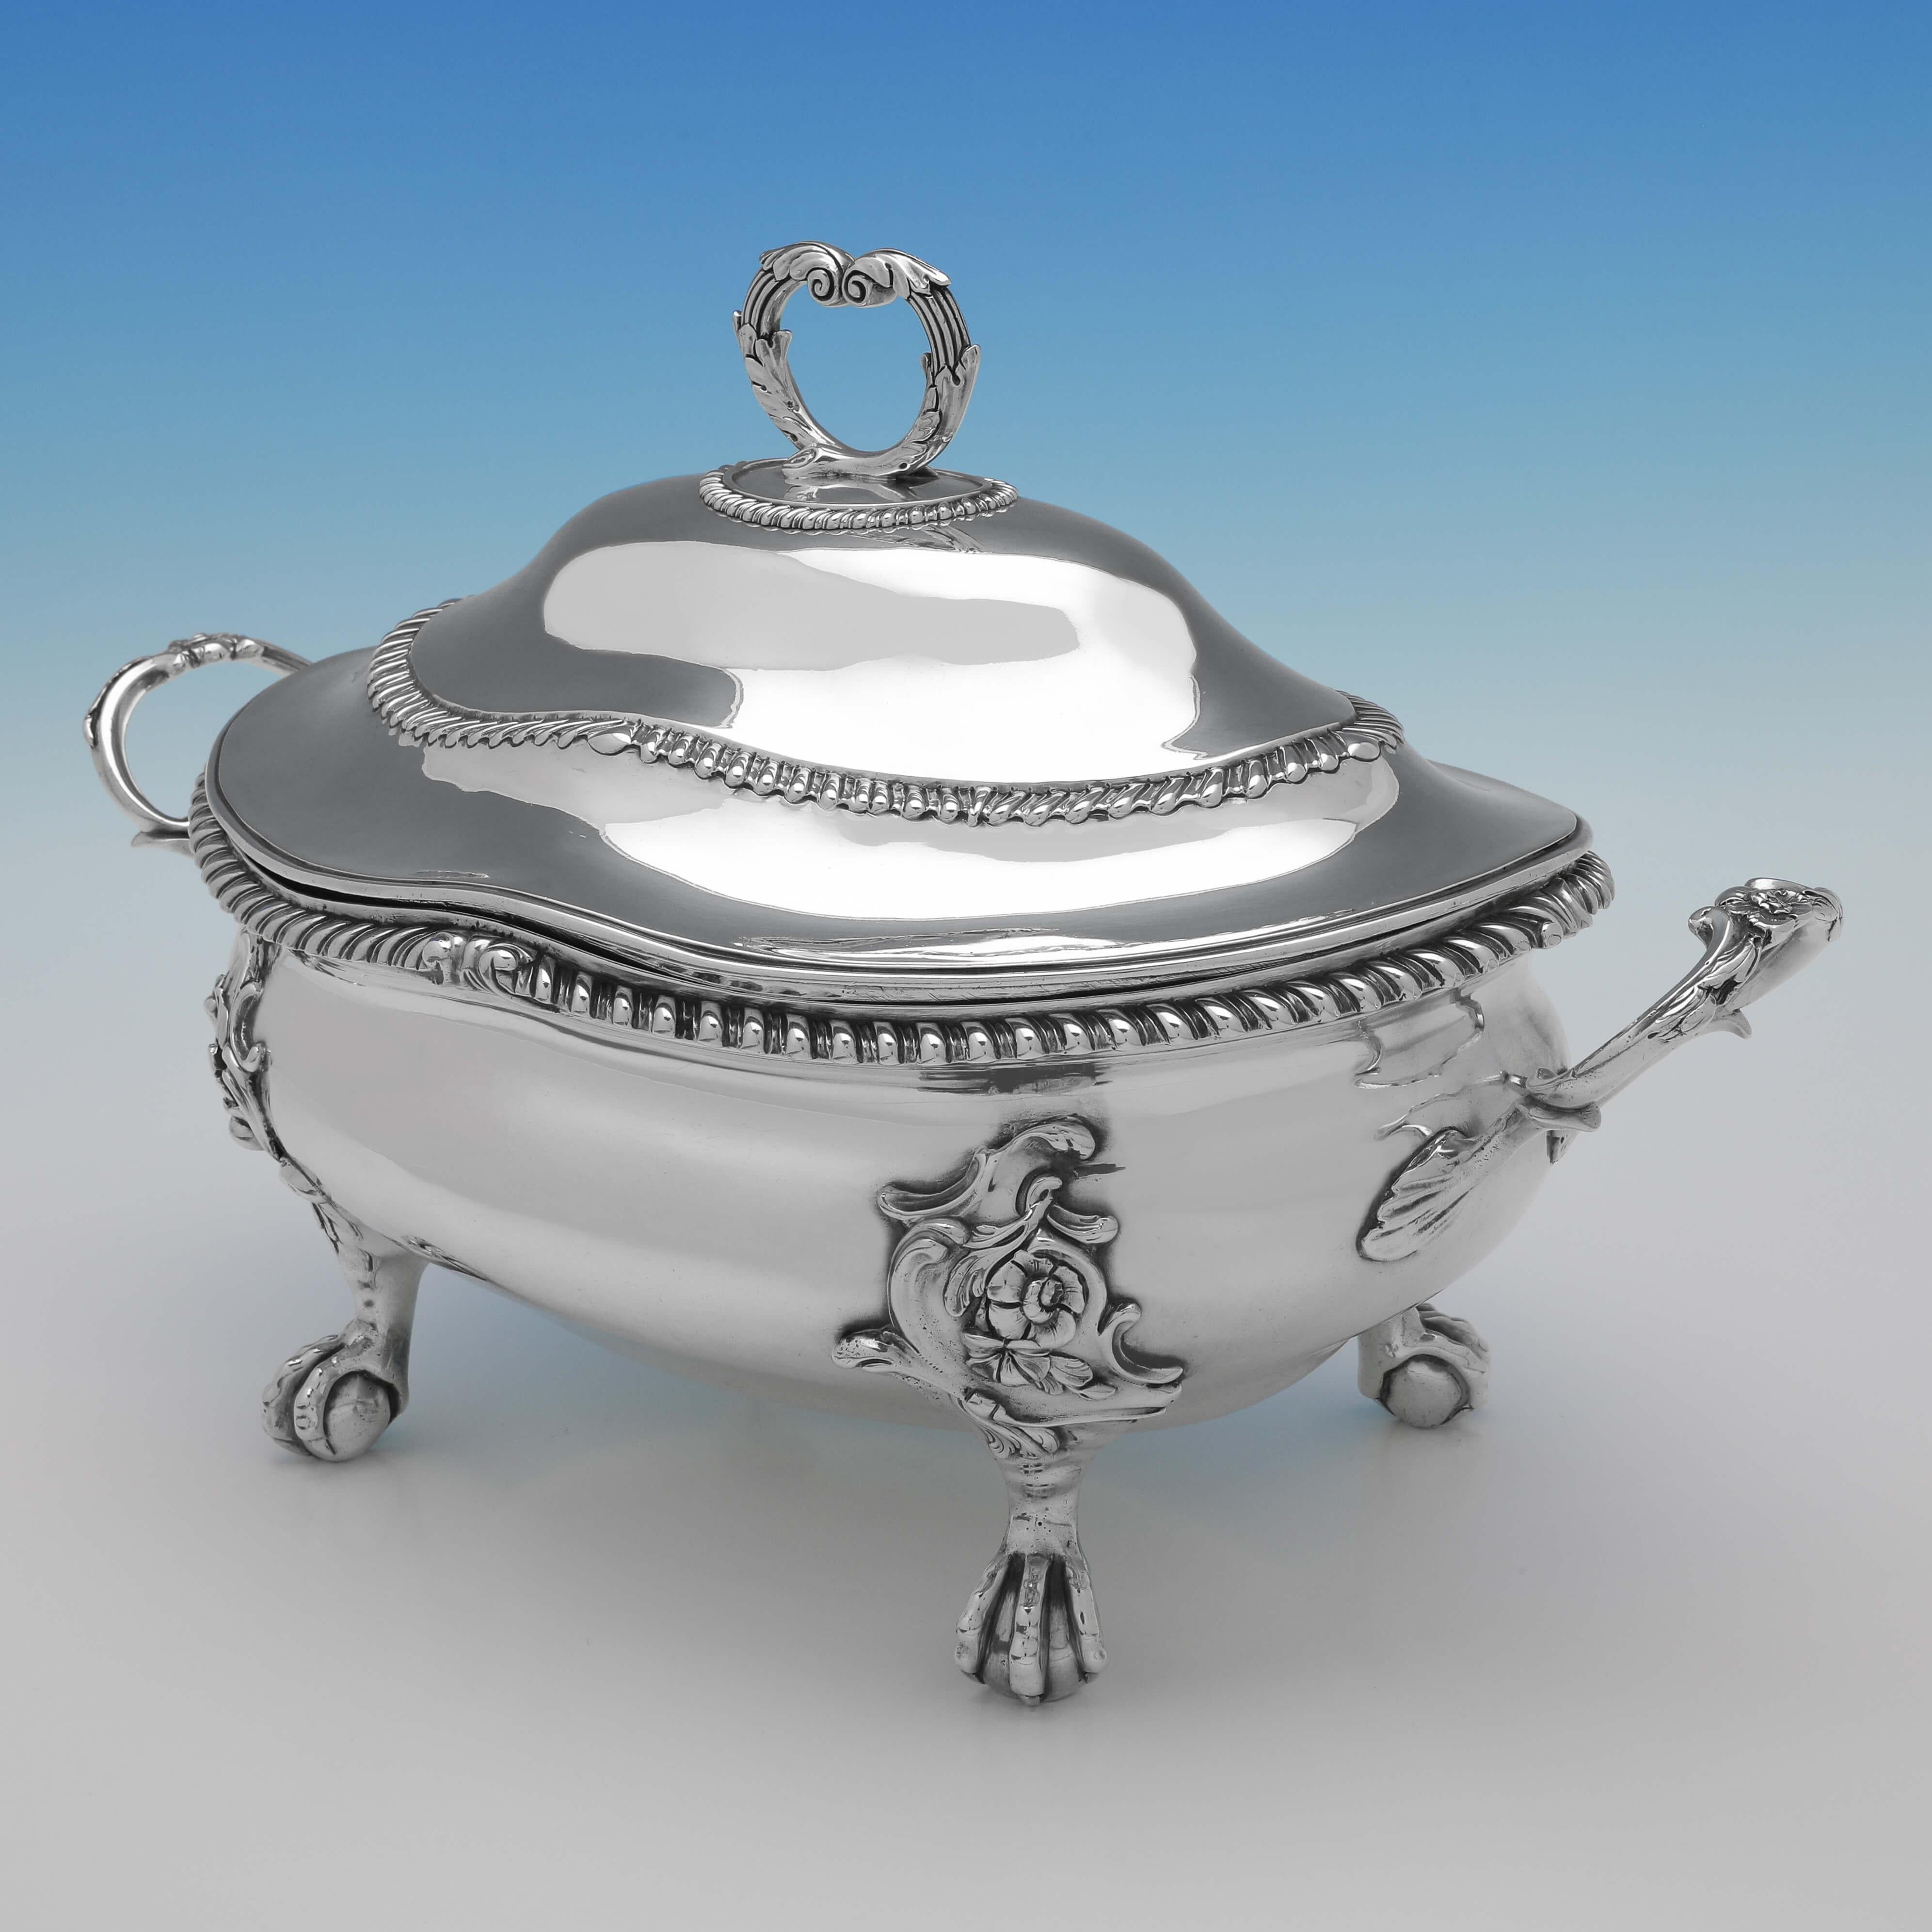 Hallmarked in London in 1766 by Lewis Herne & Francis Butty, this handsome, George III, Antique Sterling Silver Soup Tureen, features gadroon borders on the body and lid, and ornate handles and feet. The soup tureen measures 9.75